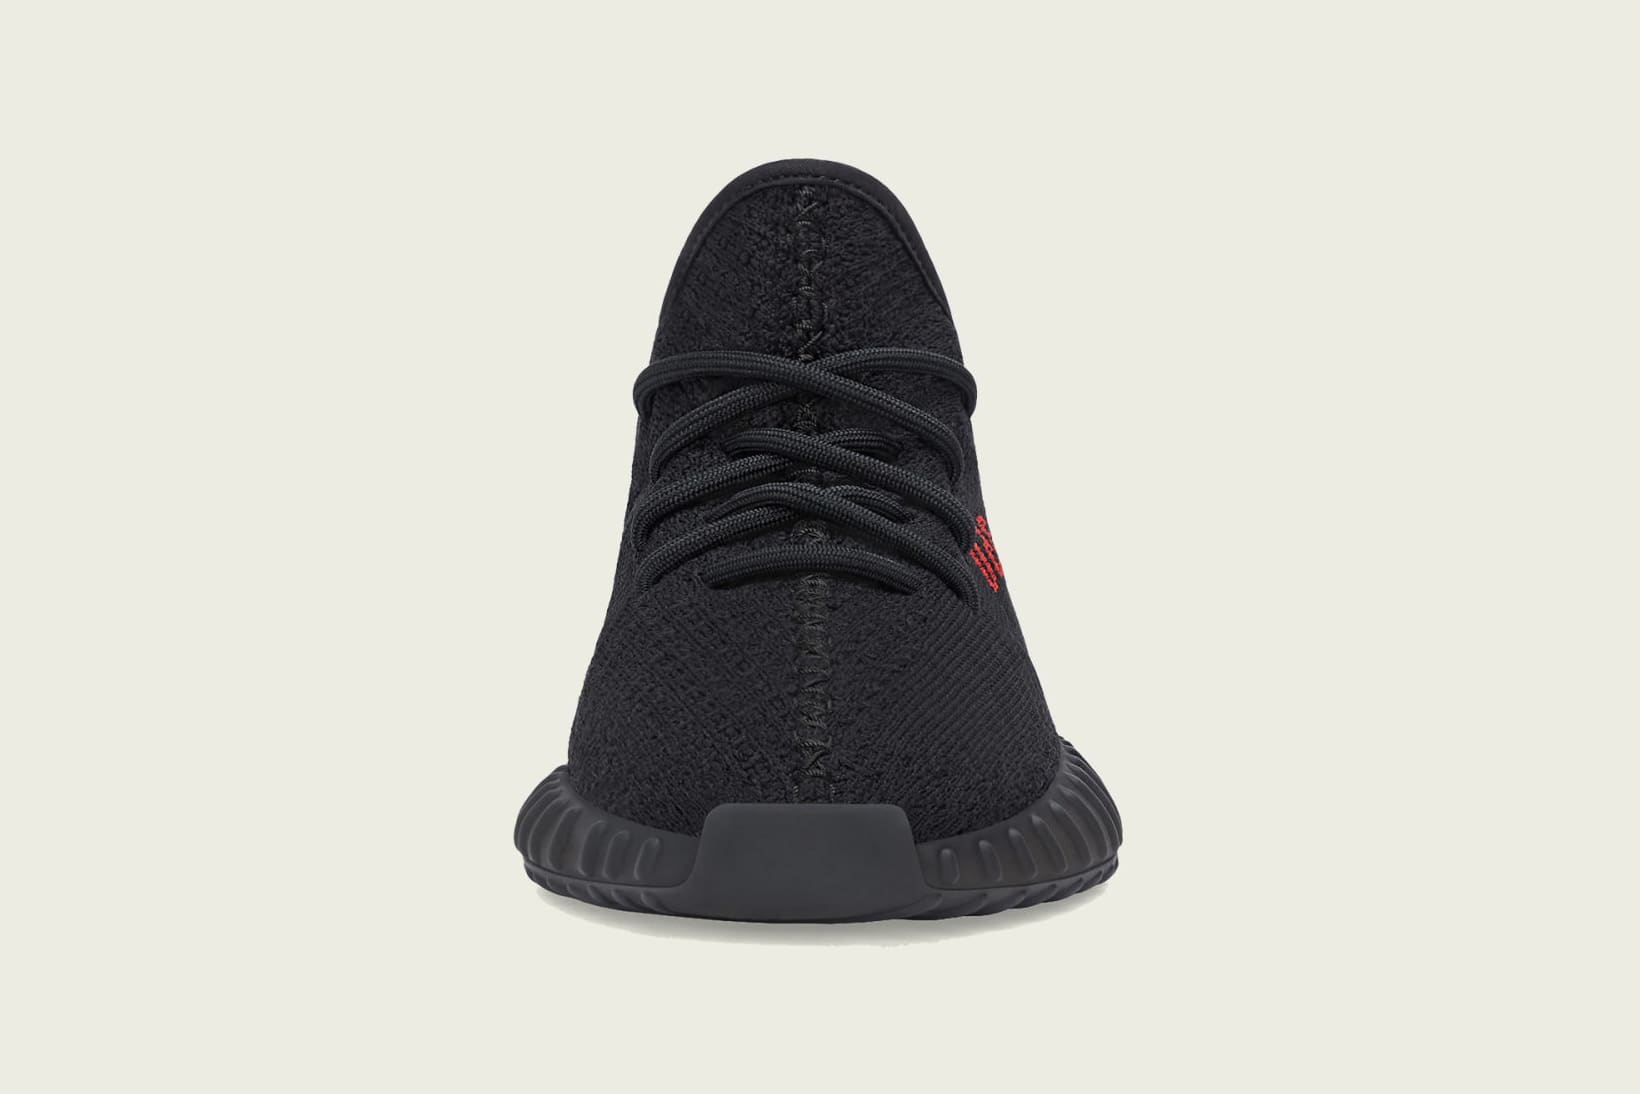 Adidas Yeezy Boost 350 V2 Black/Red CP9652 Front